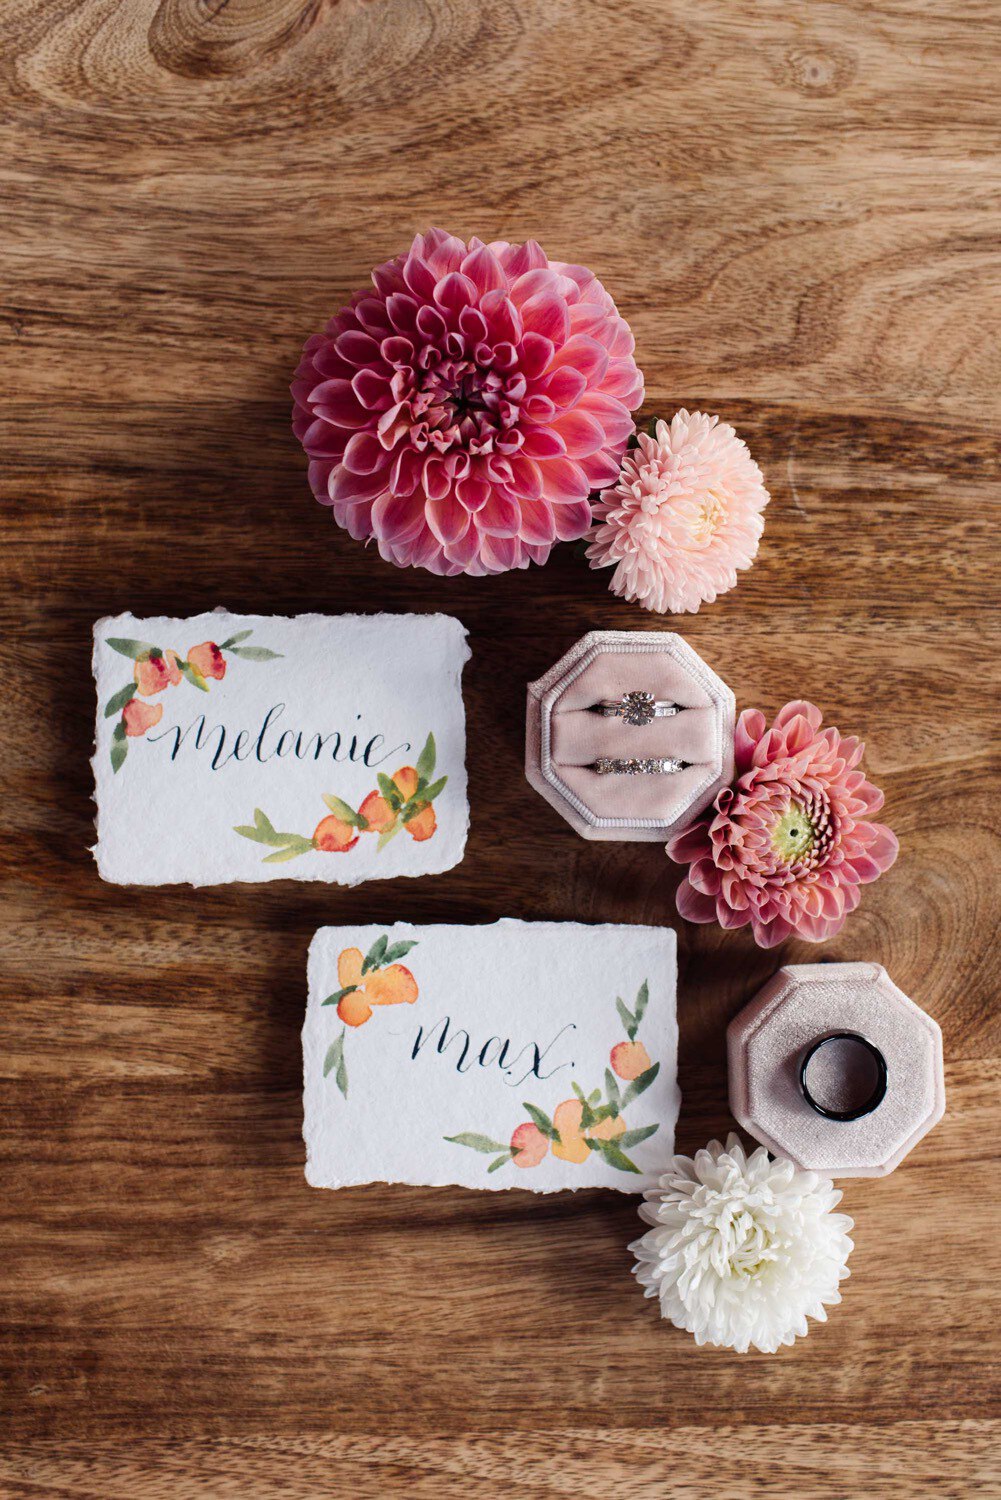 Wedding rings, flowers, and hand painted place cards on wood background